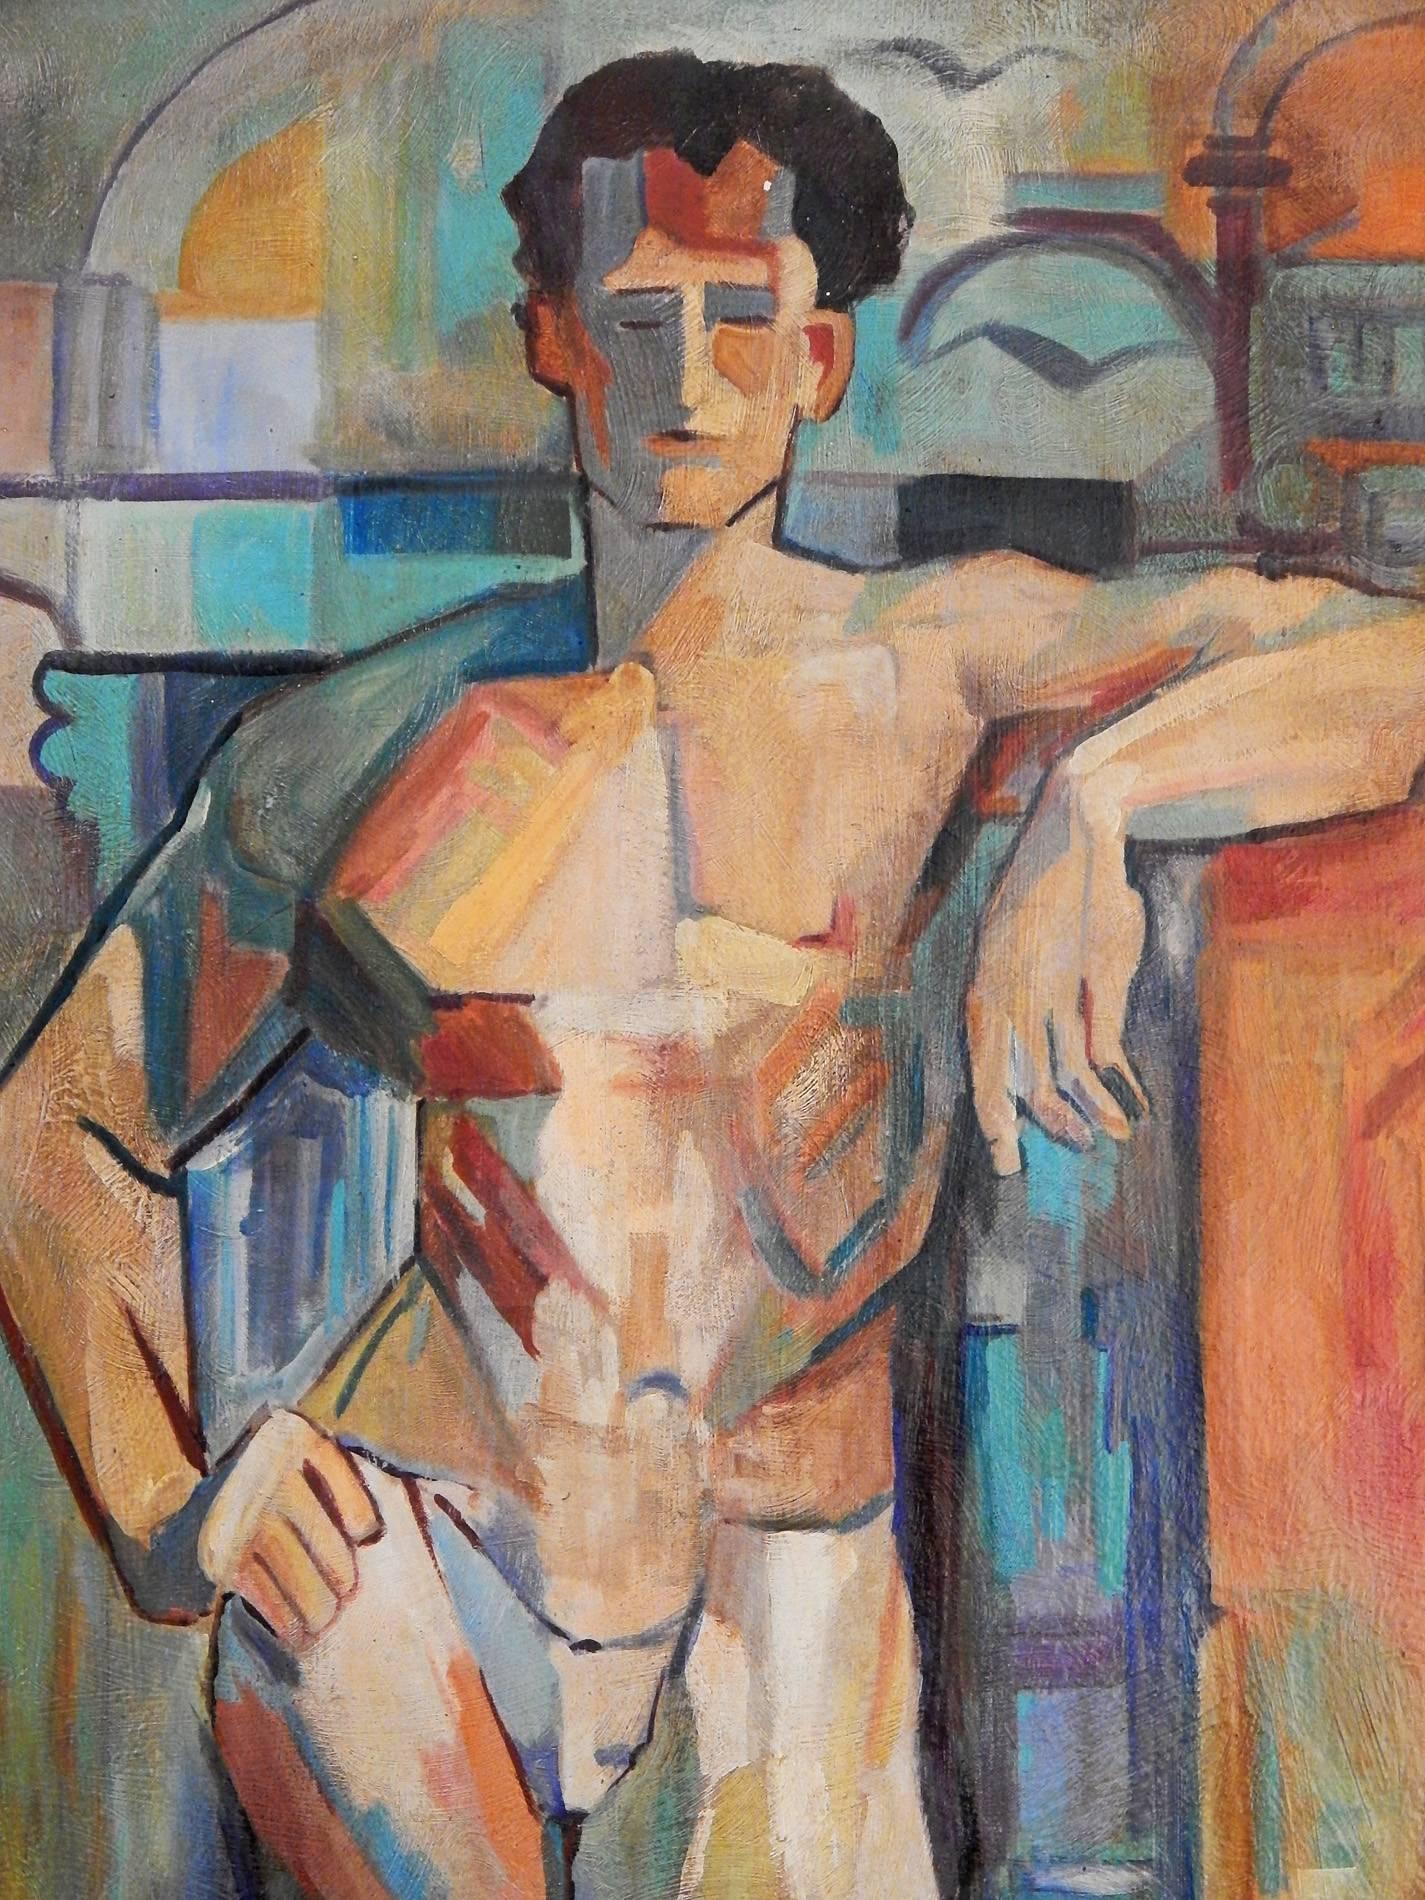 Stunningly detailed in gorgeous shades of turquoise, butterscotch, Mediterranean blue and deep red, this Art Deco/Cubist painting was executed by A. Williams in 1938. The male figure is confidently standing with one hip cocked to the side, one arm